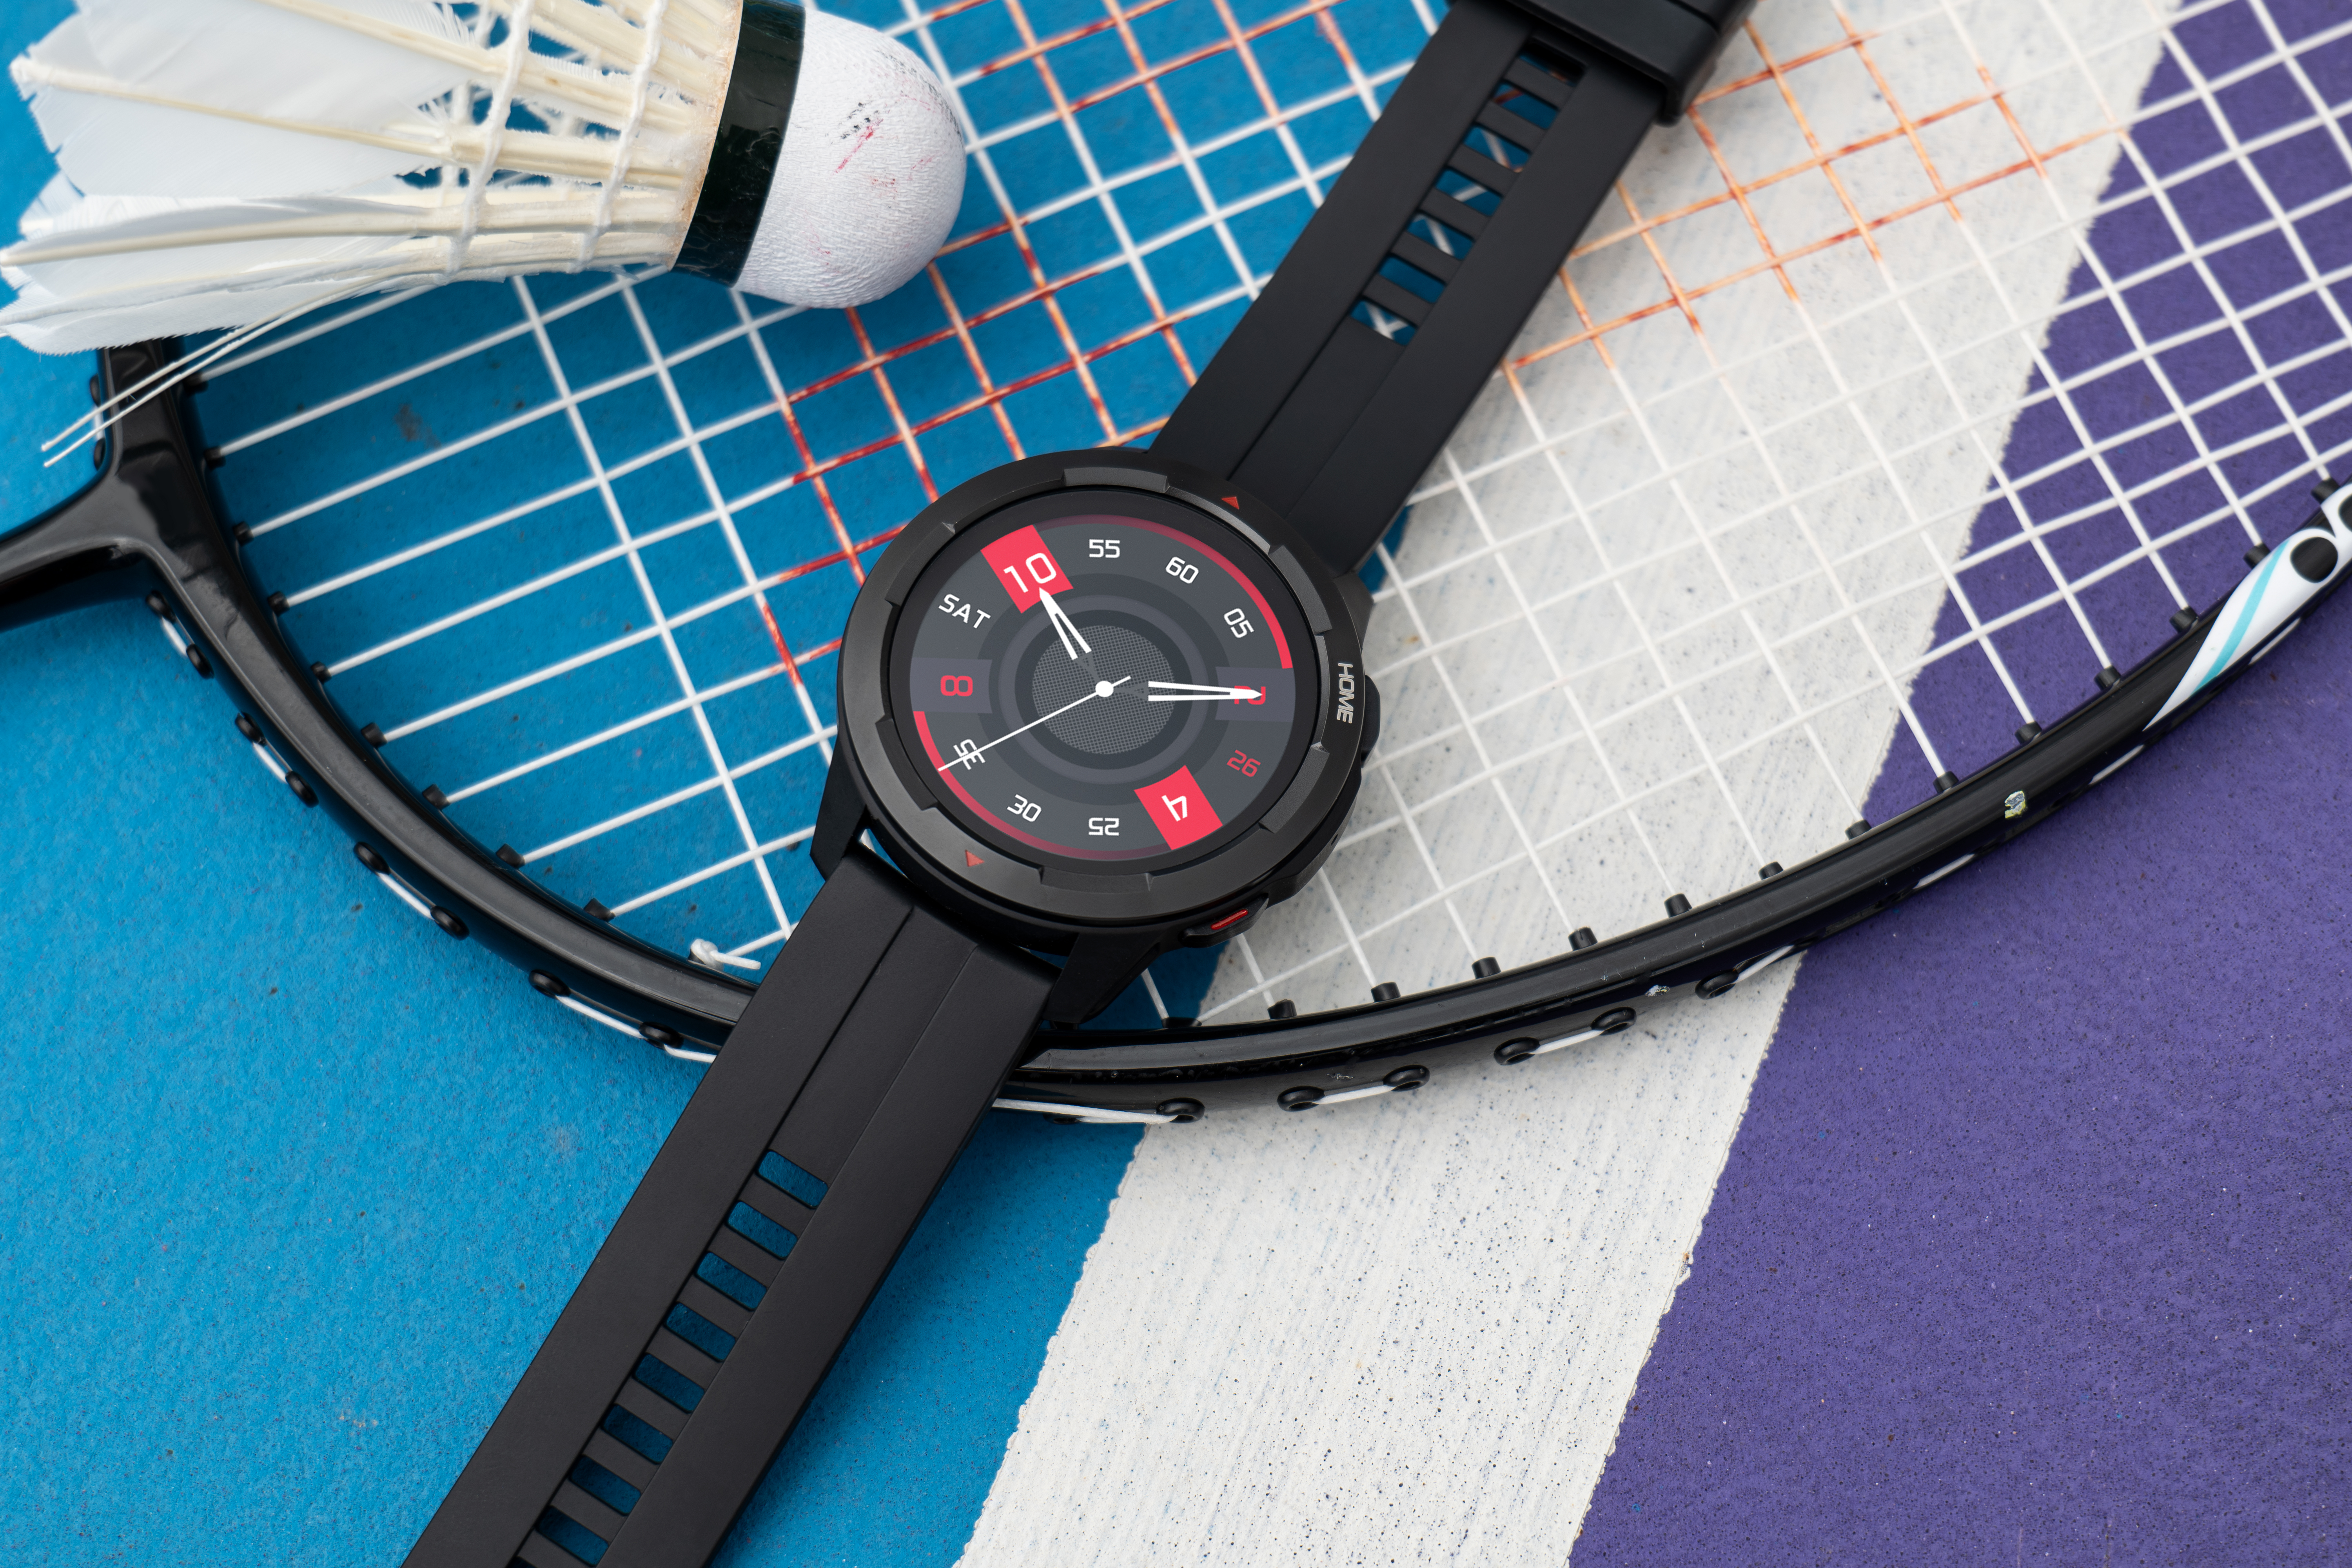 Introducing the latest smartwatch – your perfect fitness companion